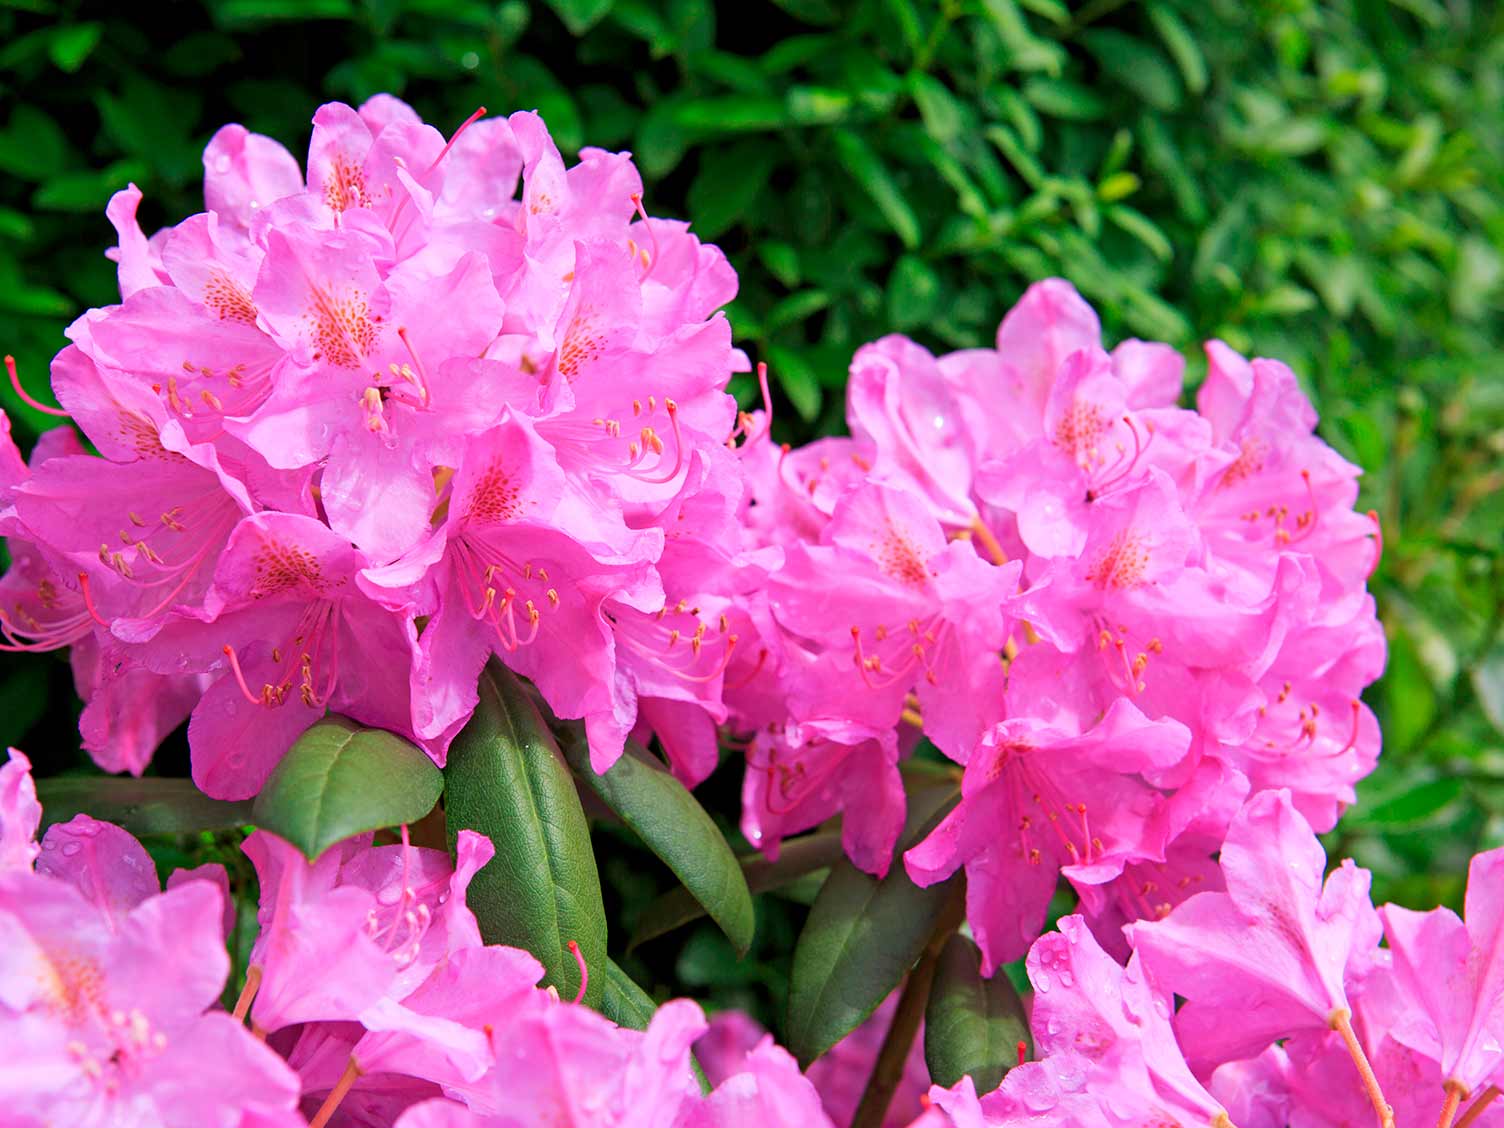 Image of Rhododendron ericaceous plant